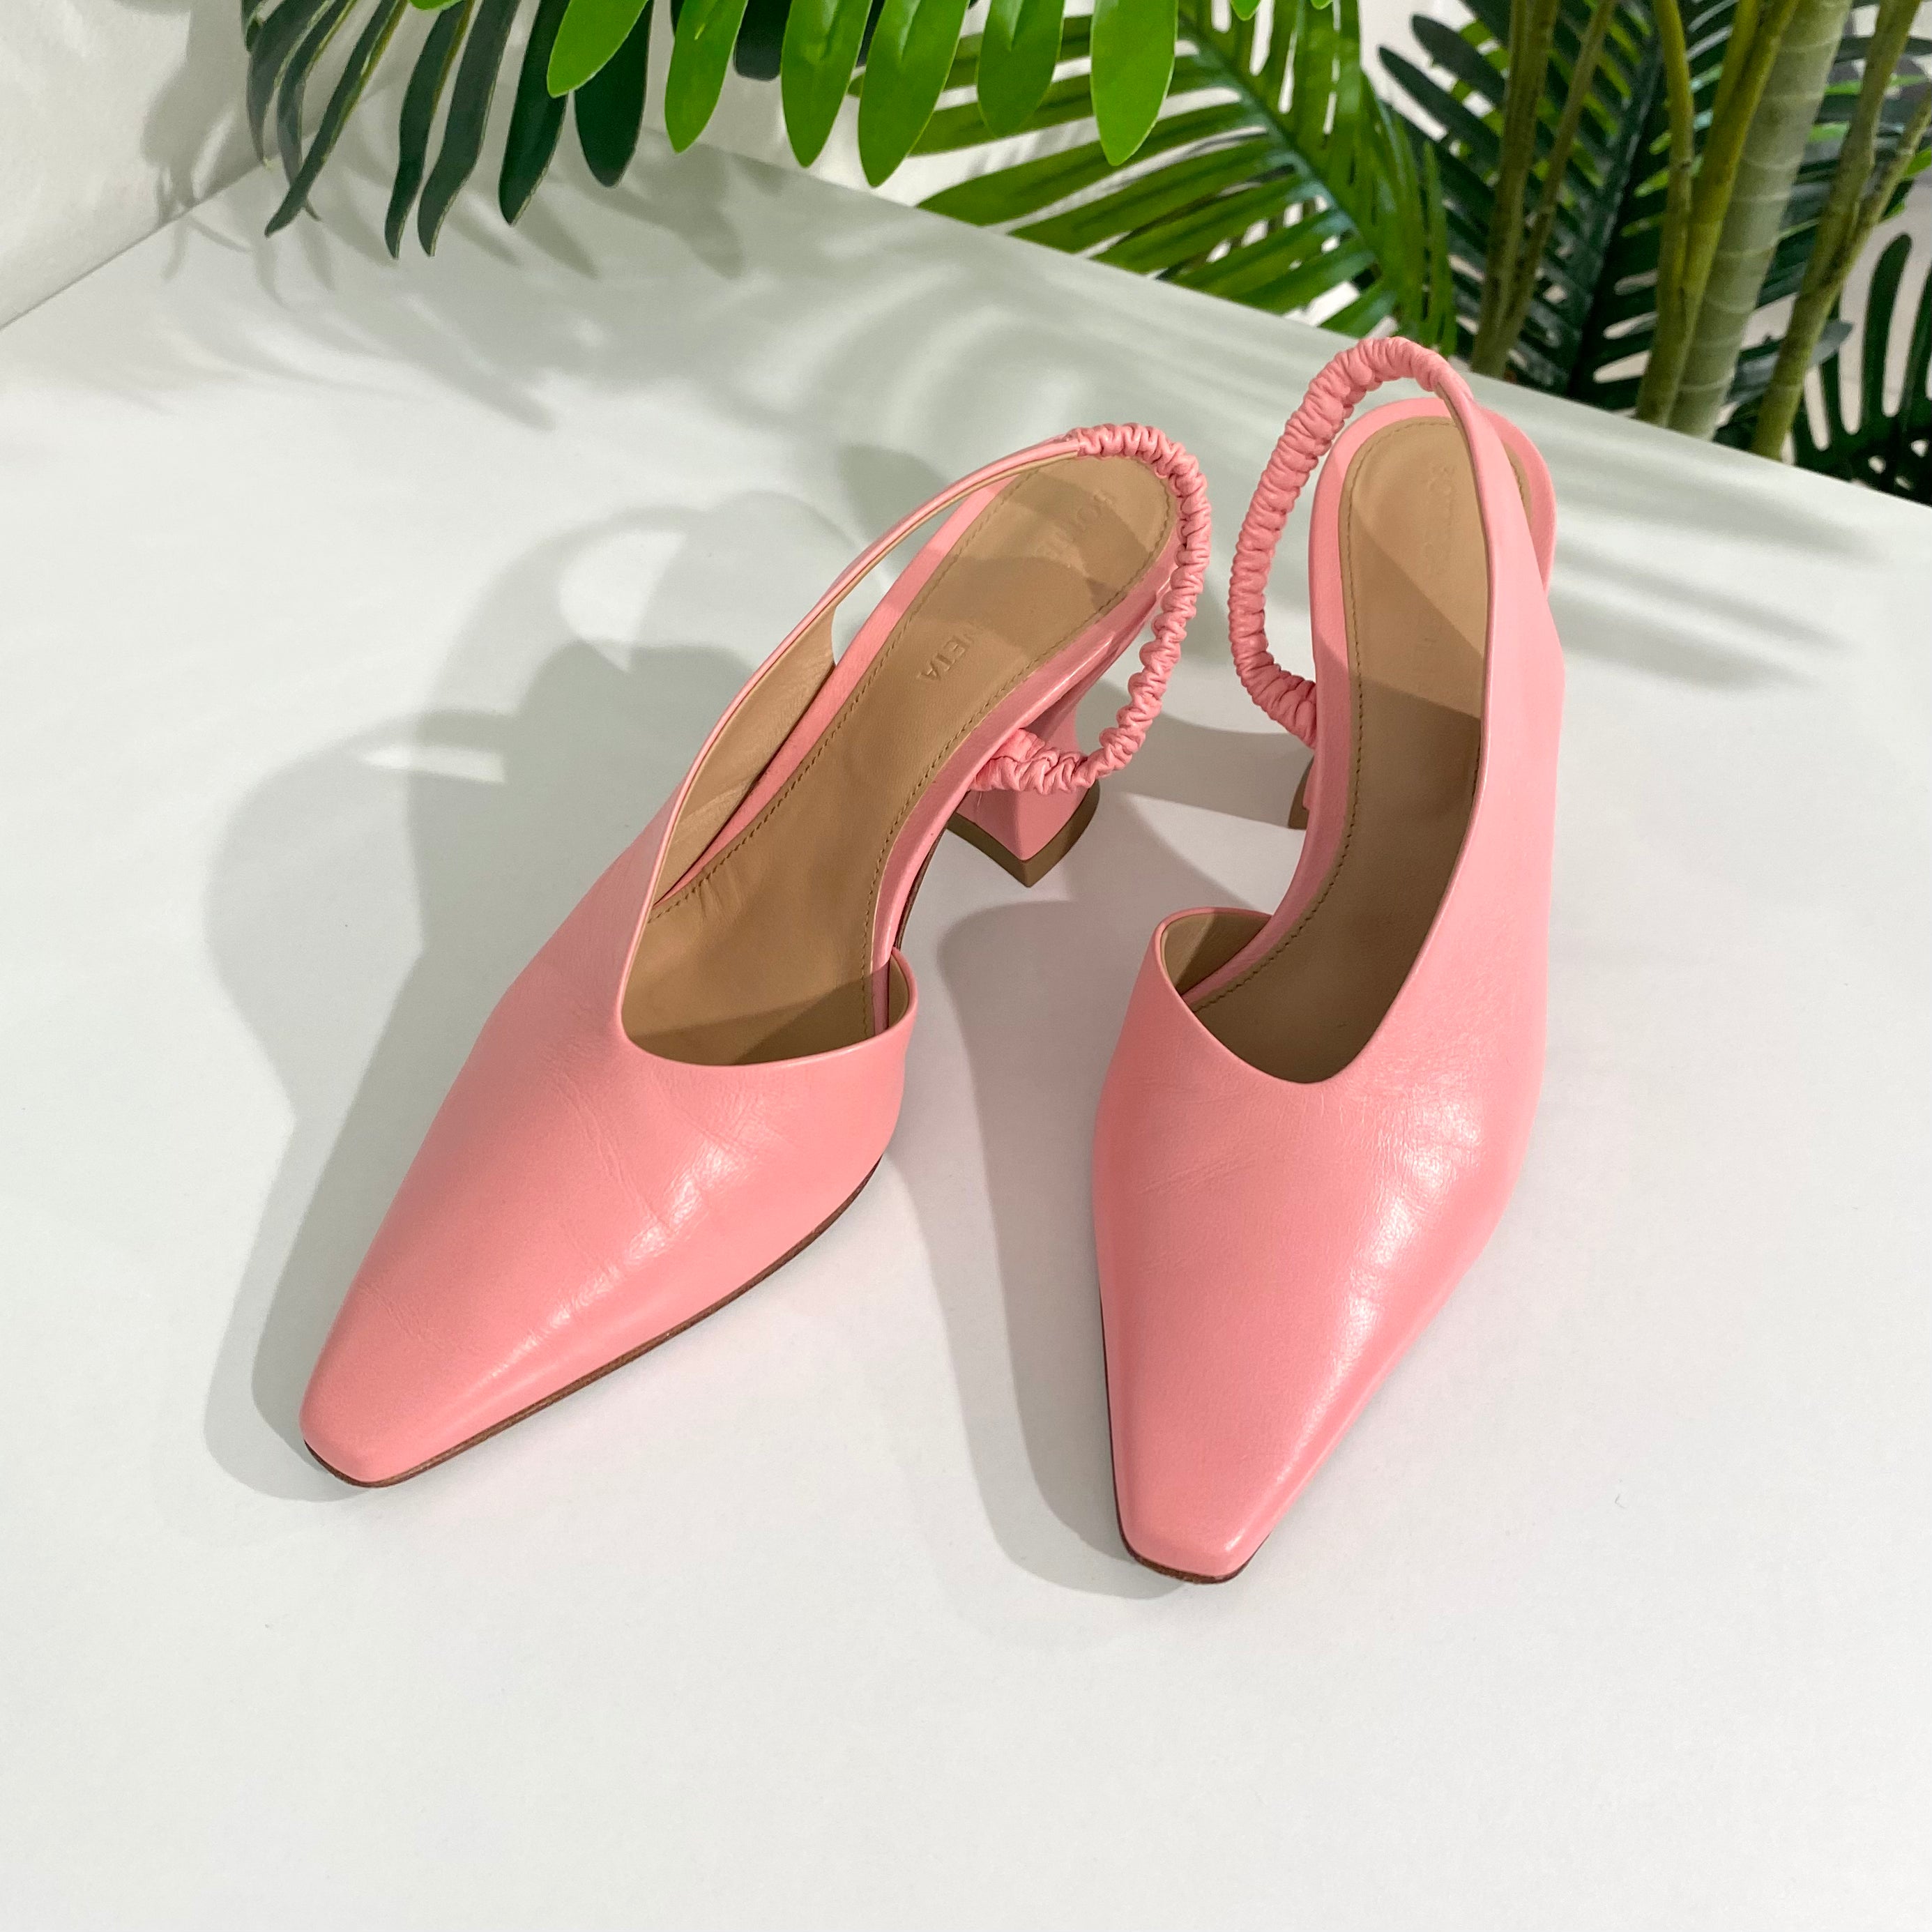 Bottega Caval on Instagram: Exclusive pink loafers! Size: 38.5